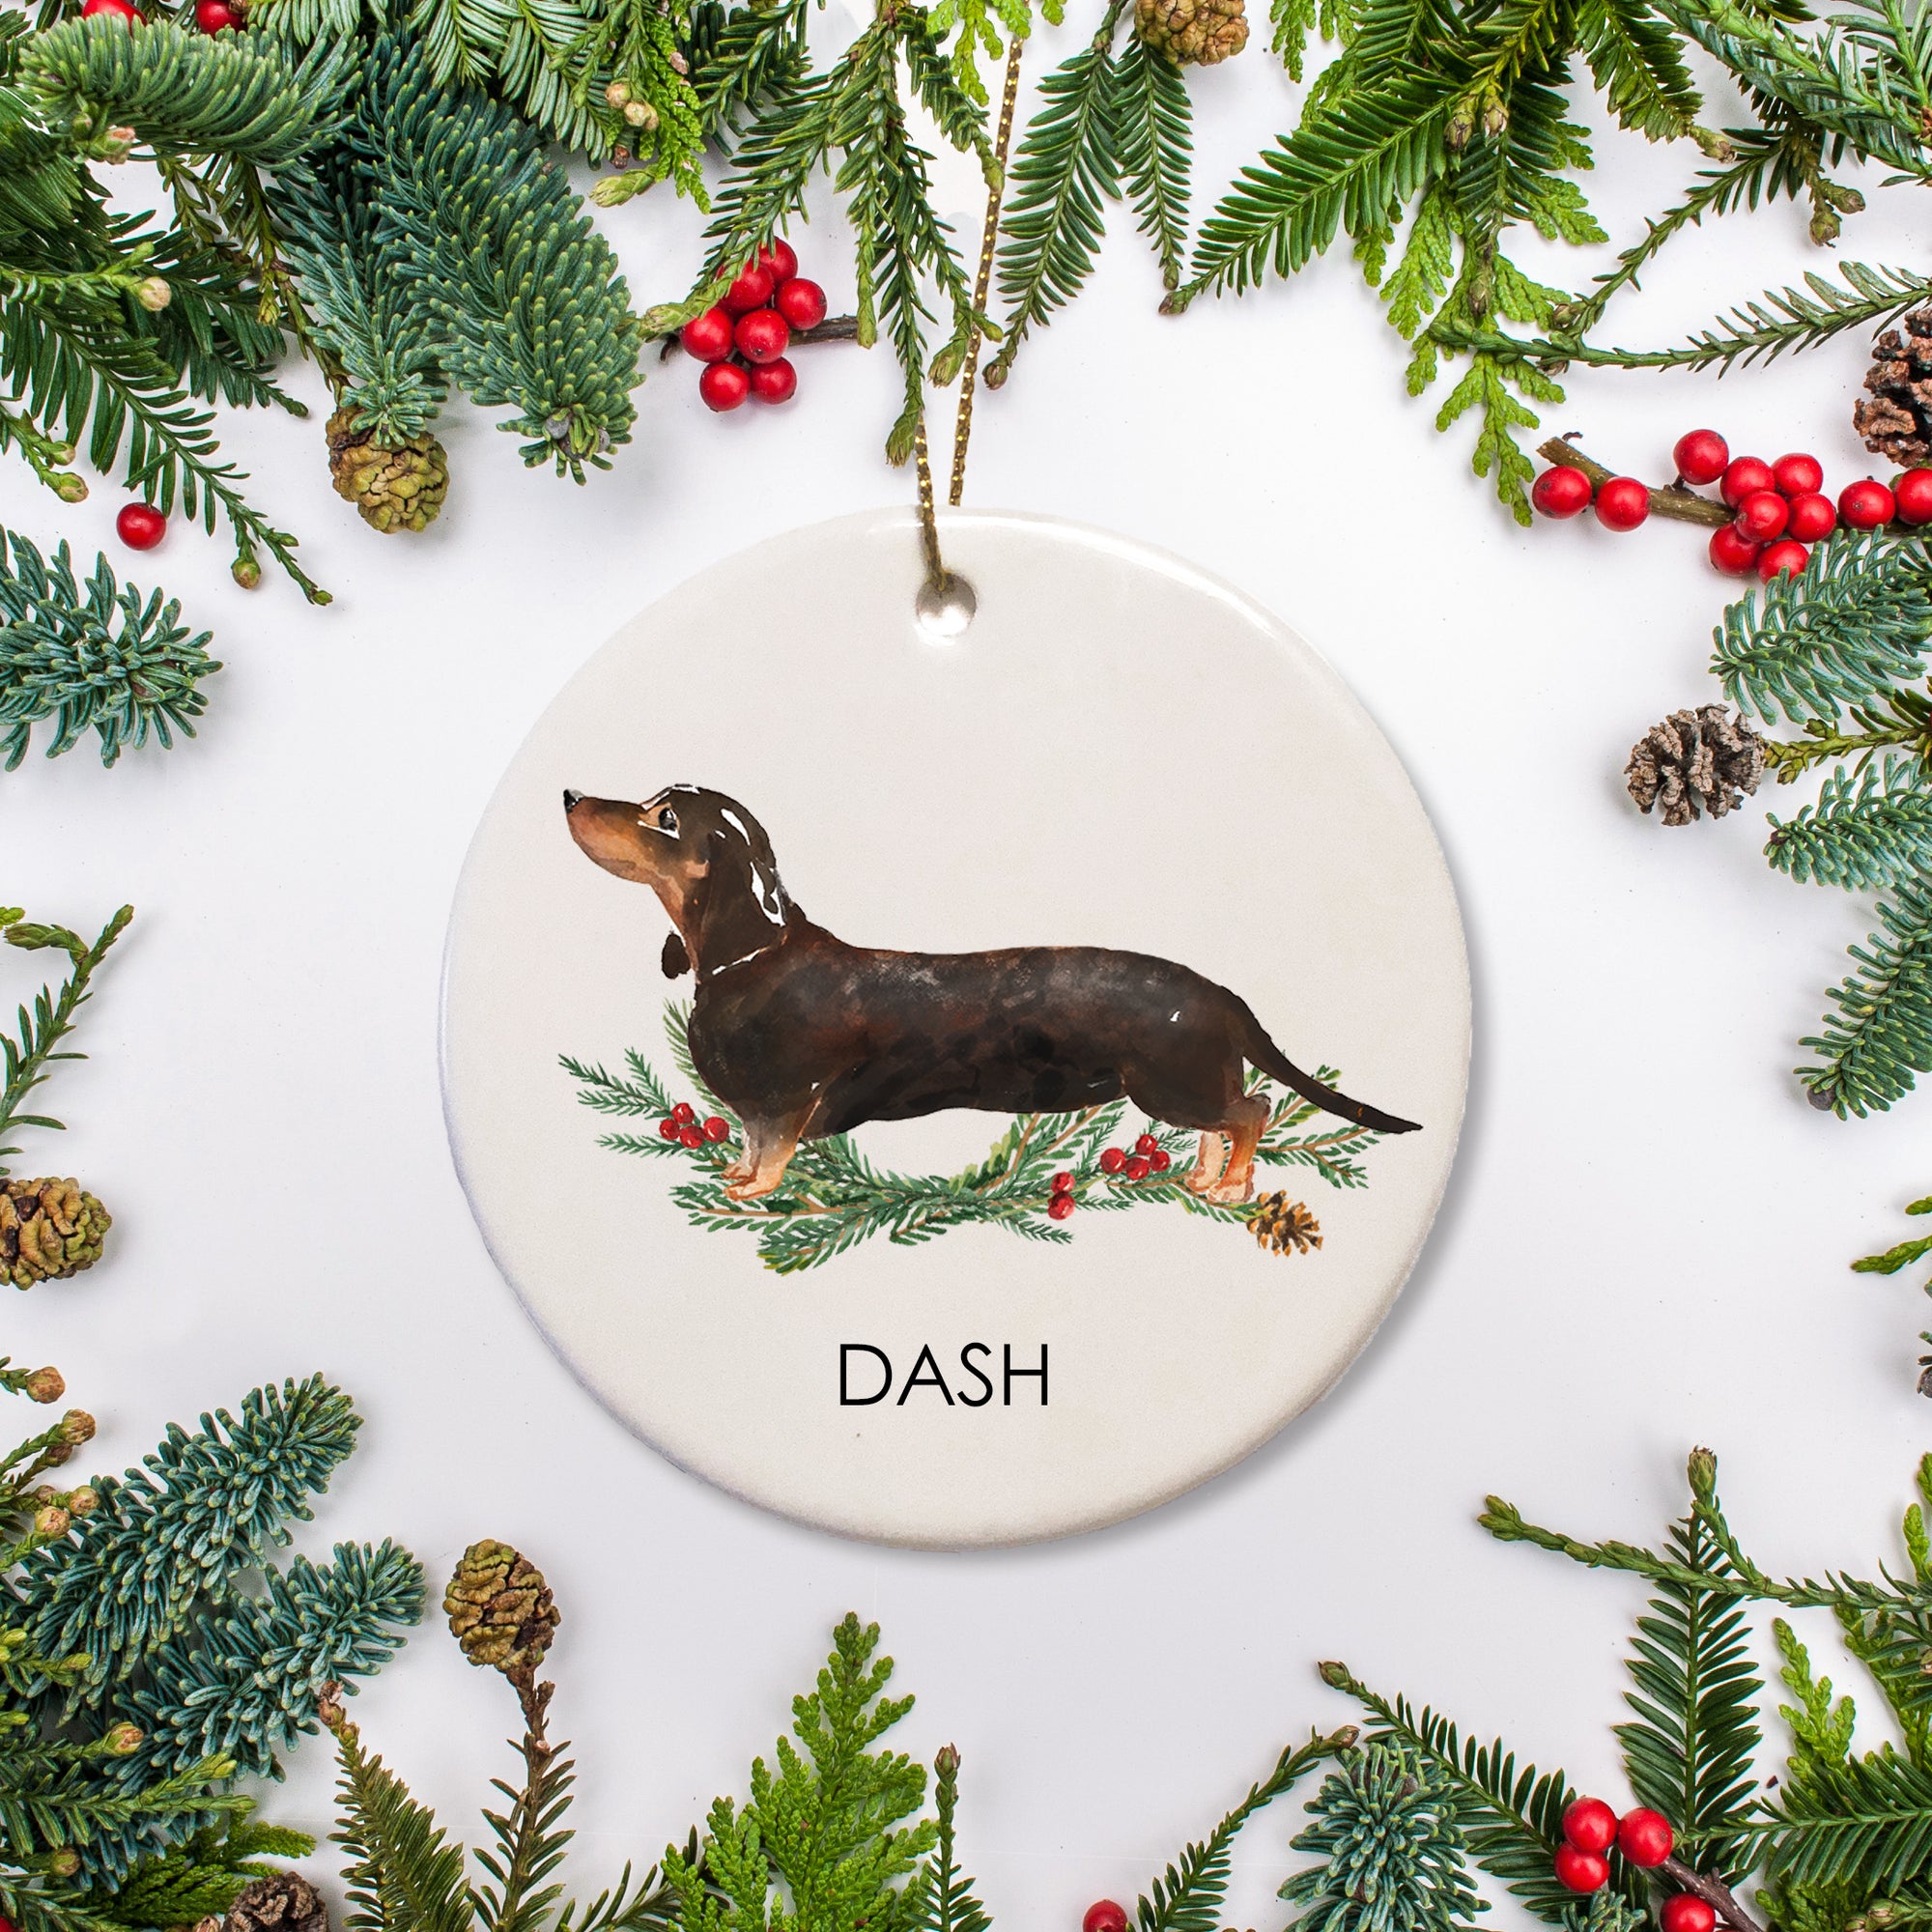 This custom ornament highlights your Dachshund, personalized with their name. An ideal gift for any pet enthusiast or a keepsake to mark your pet's festive season.